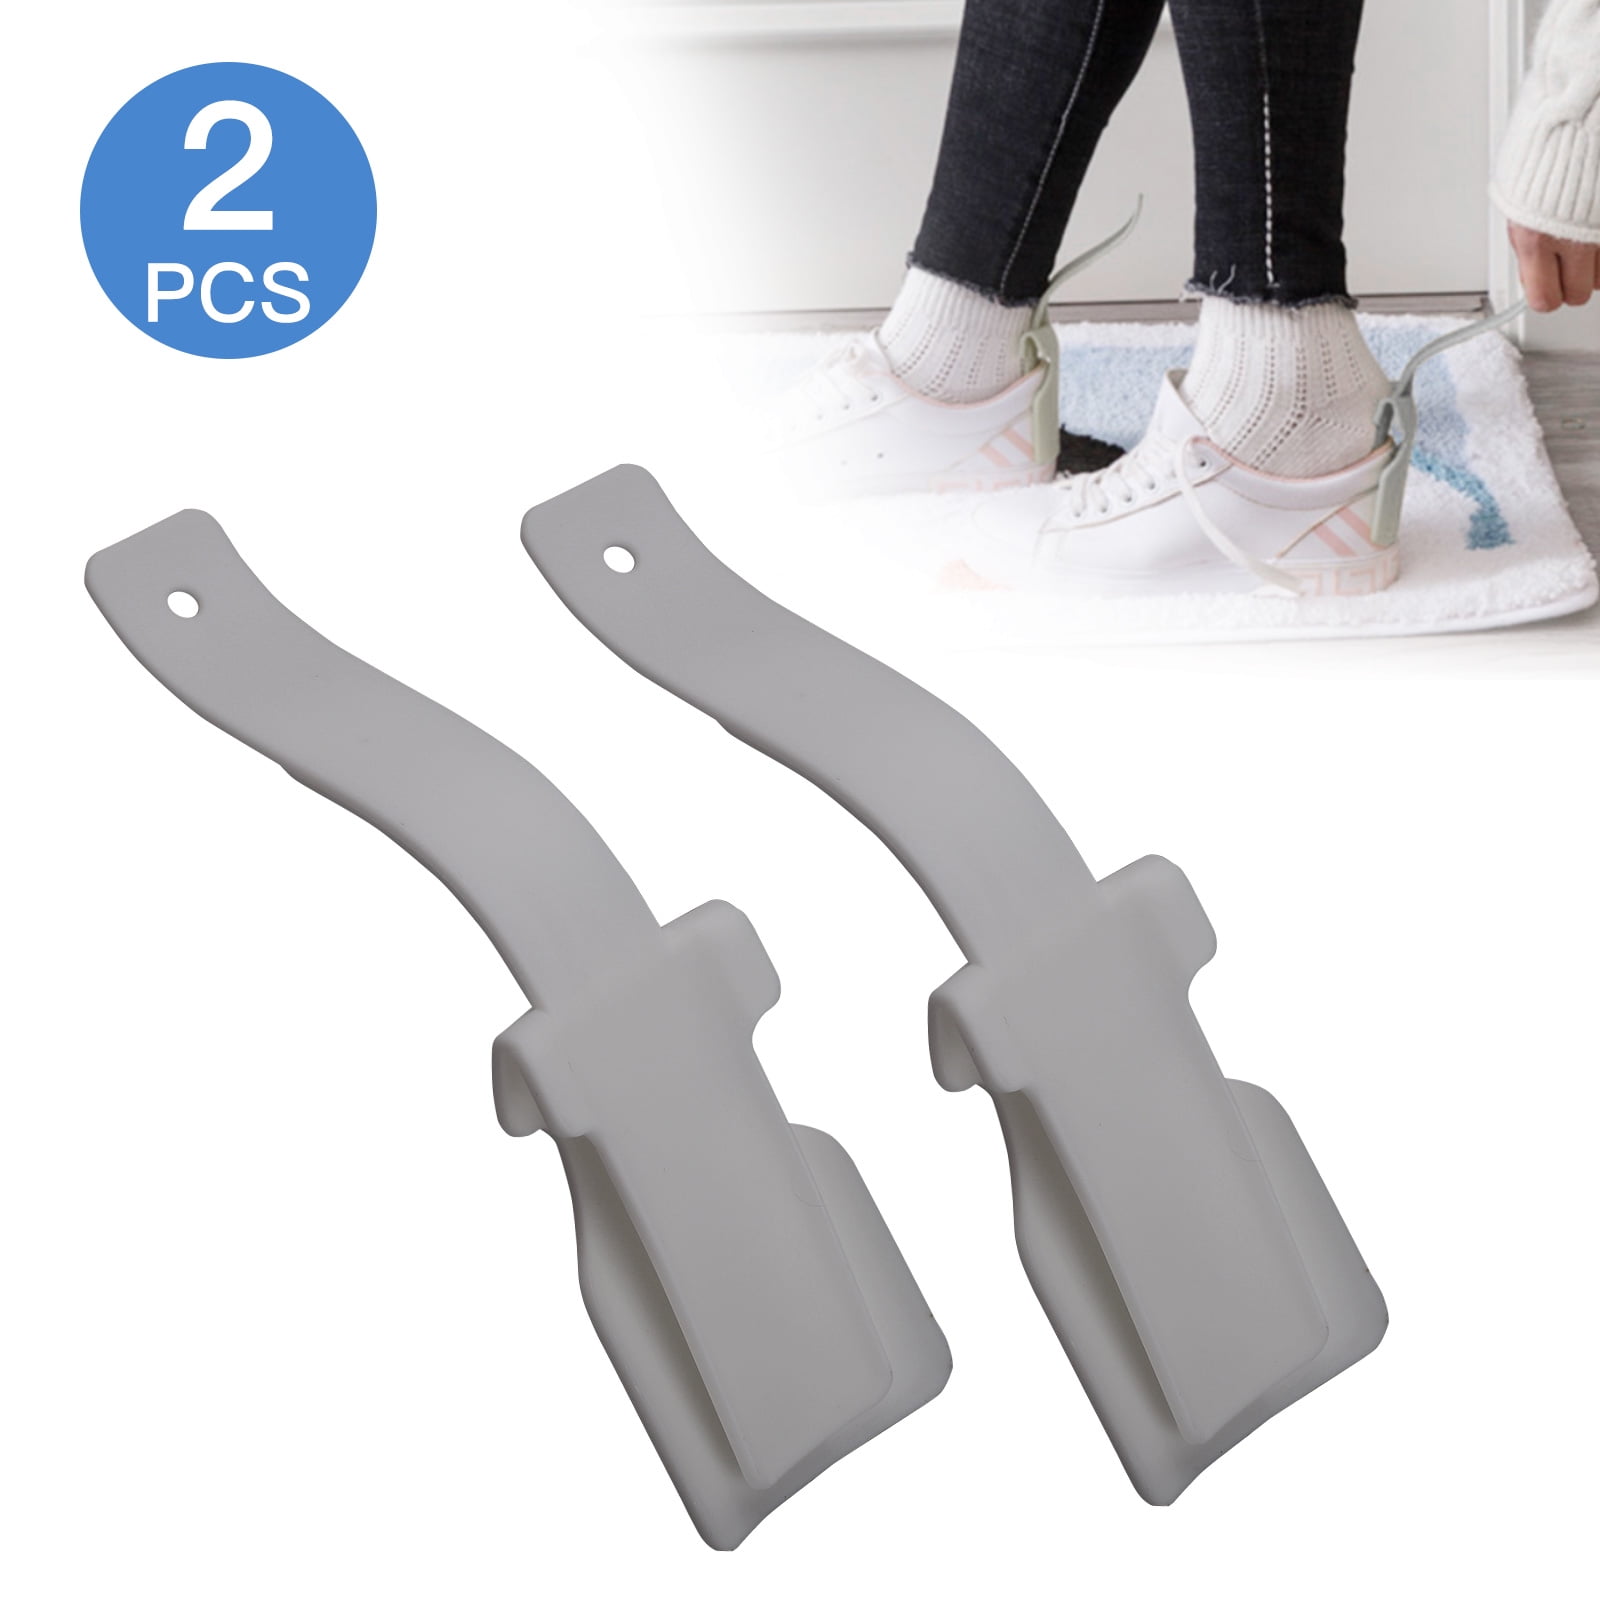 Women Easy on Easy Off,One Size Fits for All Shoes Funmazit 4Pcs Long Shoe Horn Long Handle Shoe Horn Shoehorn Lazy Shoe Helper Portable Sock Slider Handled for Men Senior and Kids Shoes 